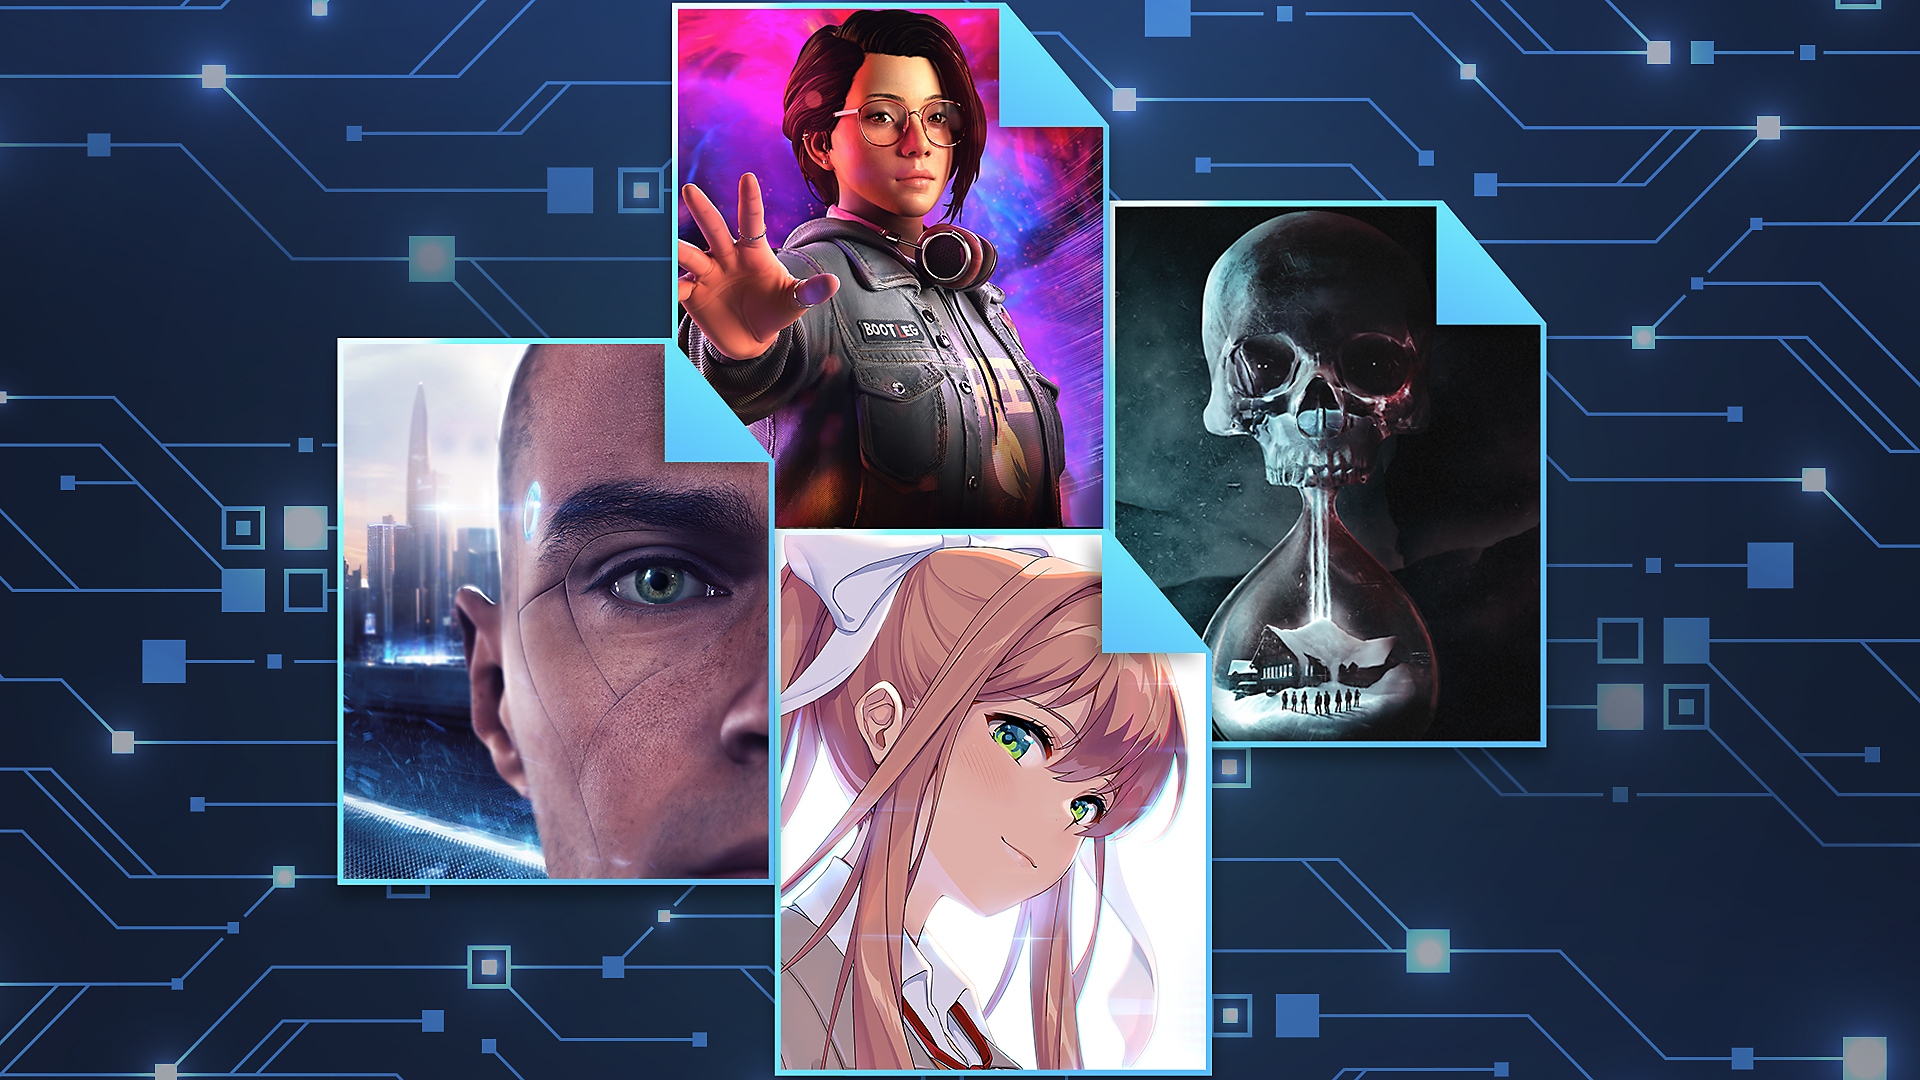 Narrative games promotional artwork featuring key art from Life is Strange: True Colours, Detroit: Become Human, Doki Doki Literature Club Plus and Until Dawn.